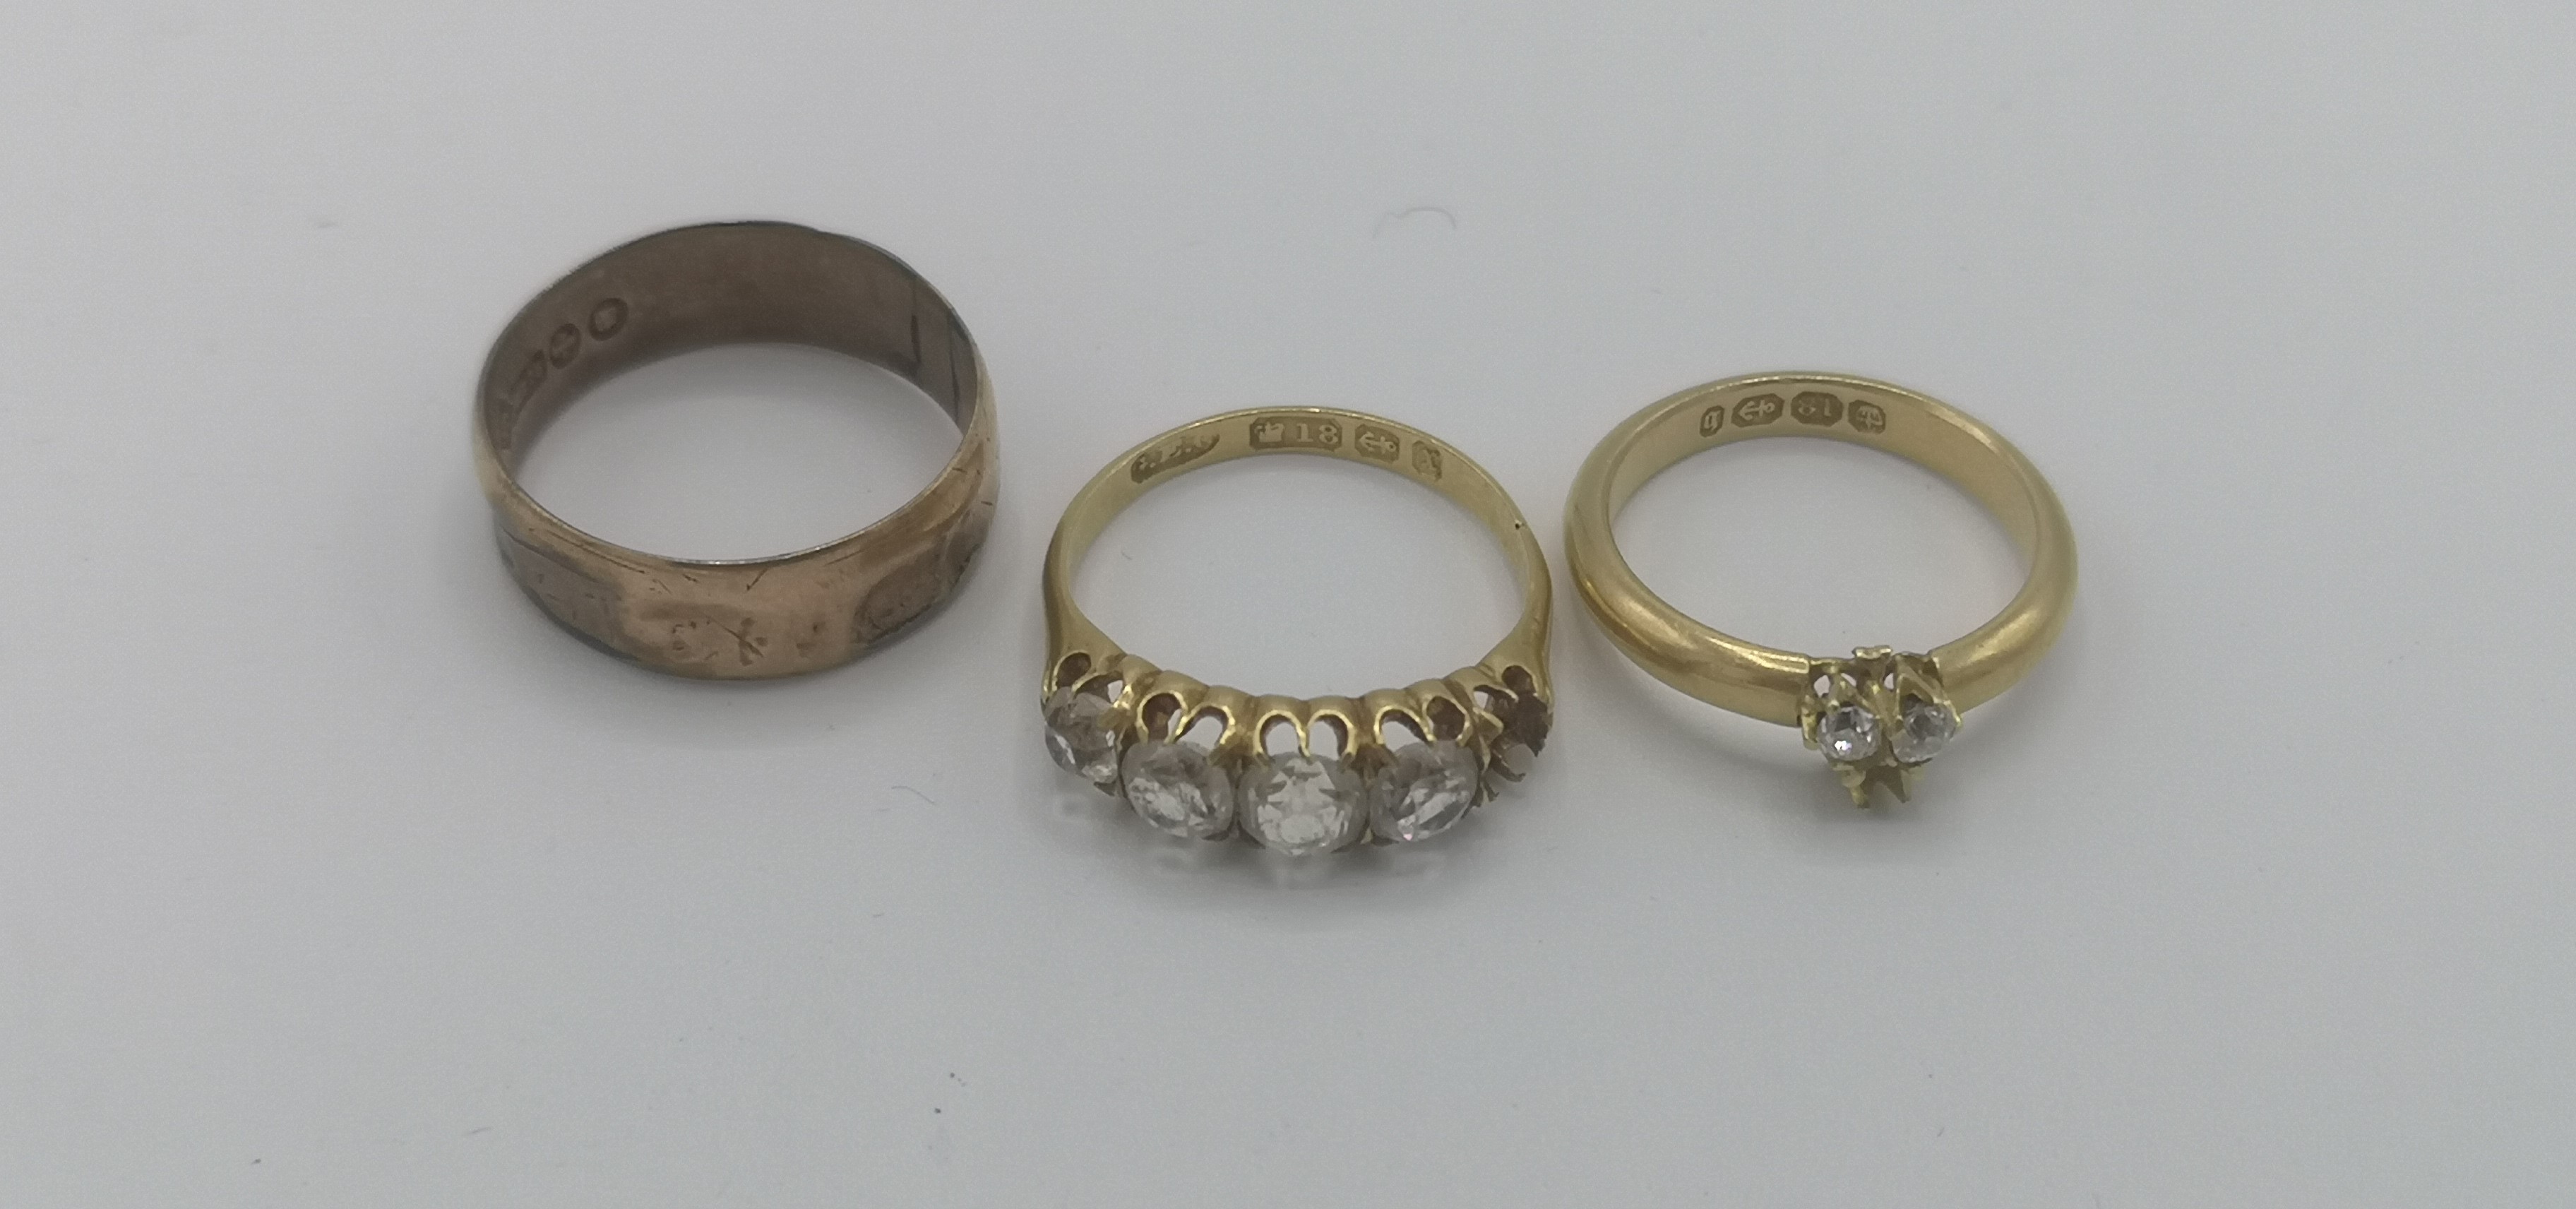 Two 18ct gold rings together with a 9ct gold ring